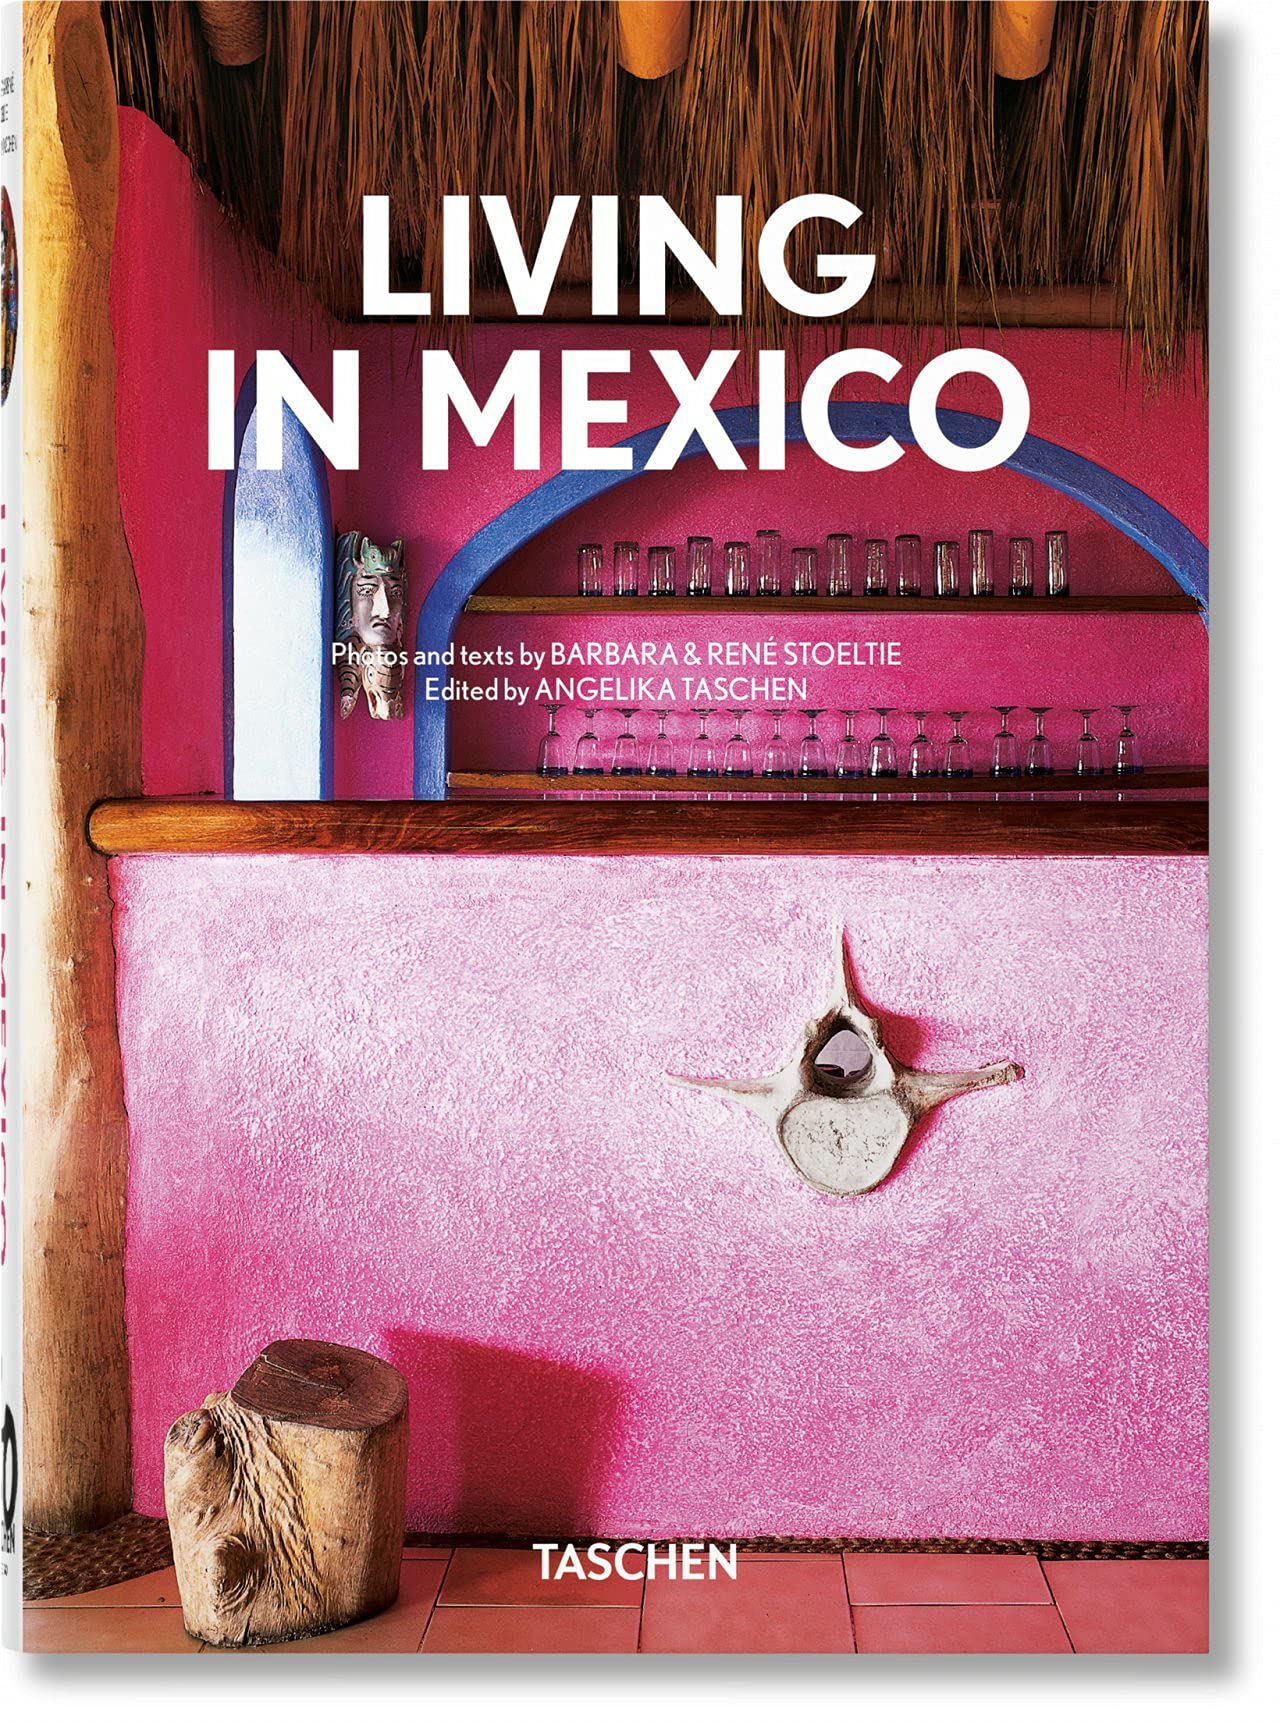 Living in Mexico images from the bible old testament